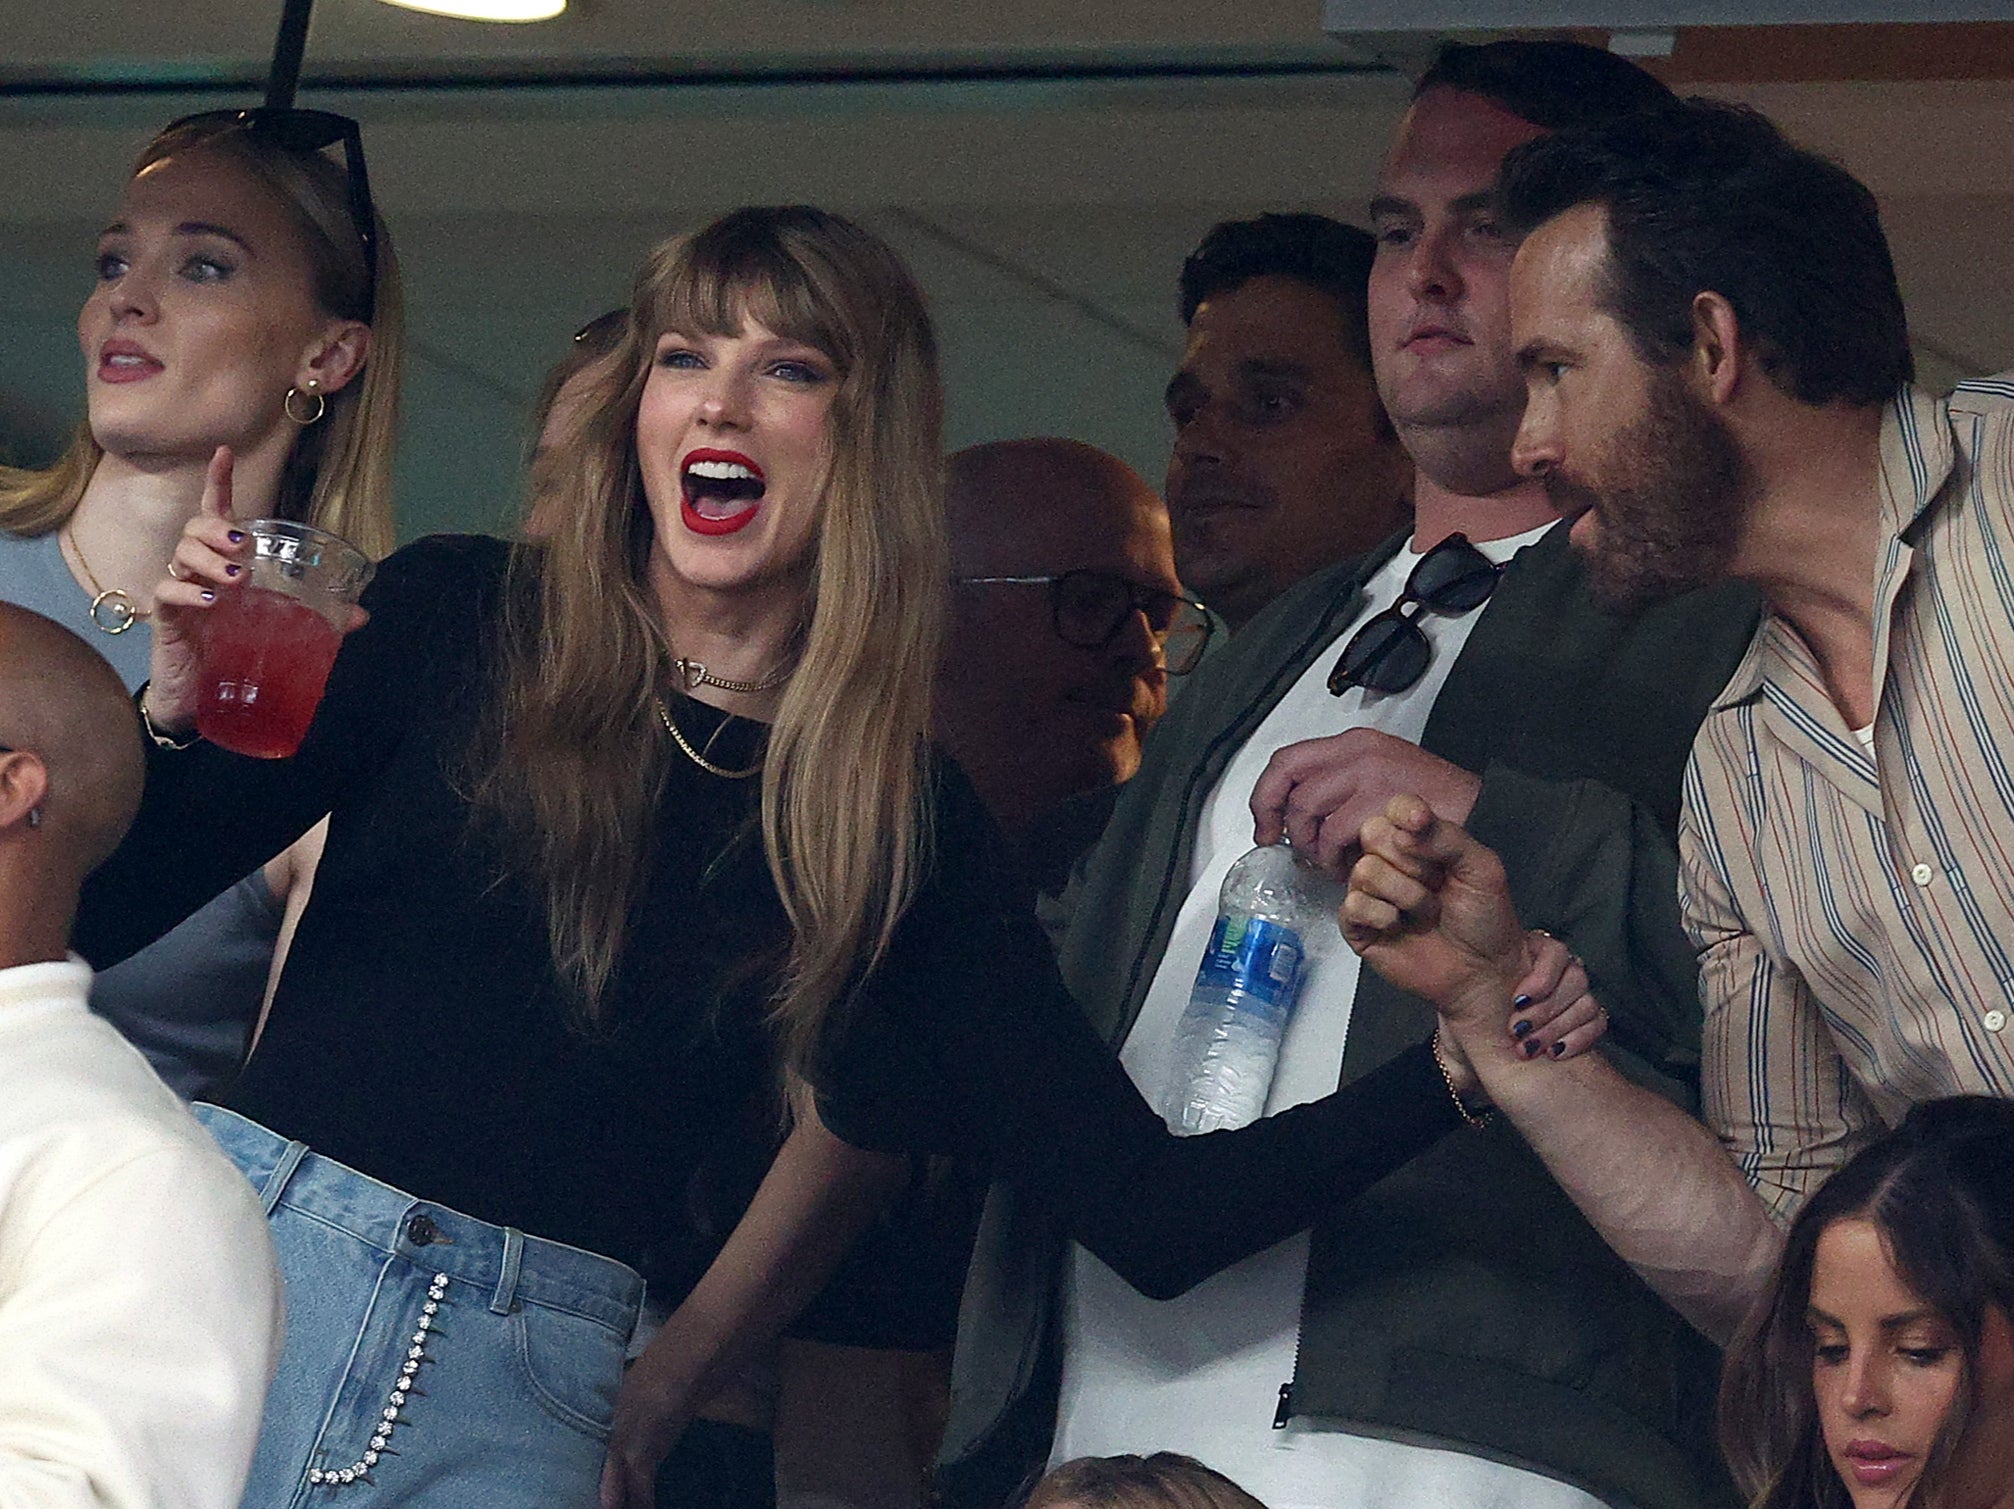 Taylor Swift enjoys the game, and then endures a torrent of misogynistic abuse